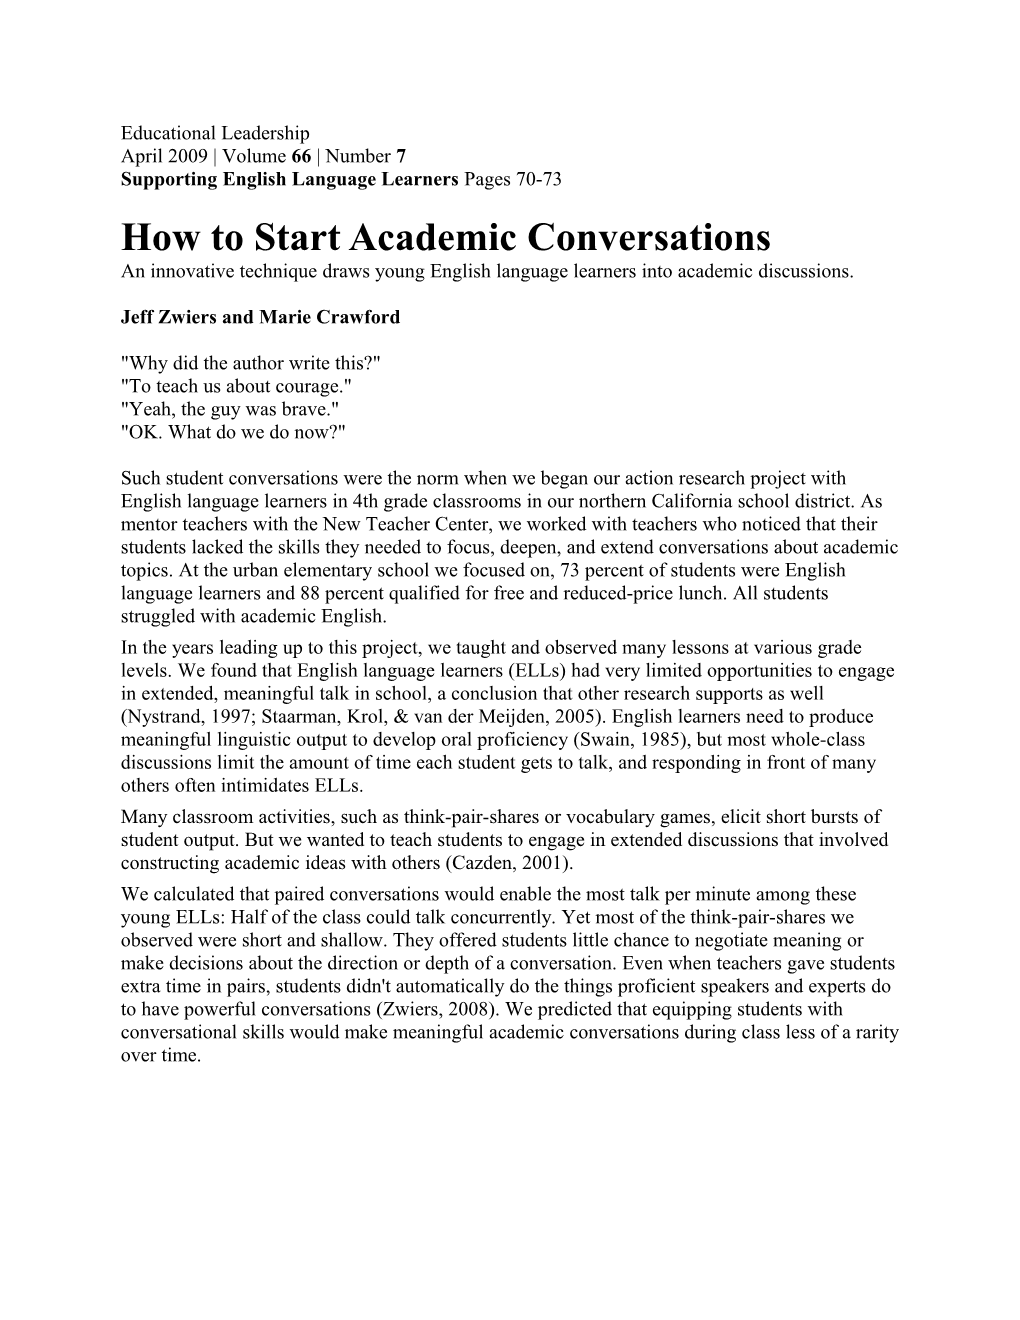 How to Start Academic Conversations